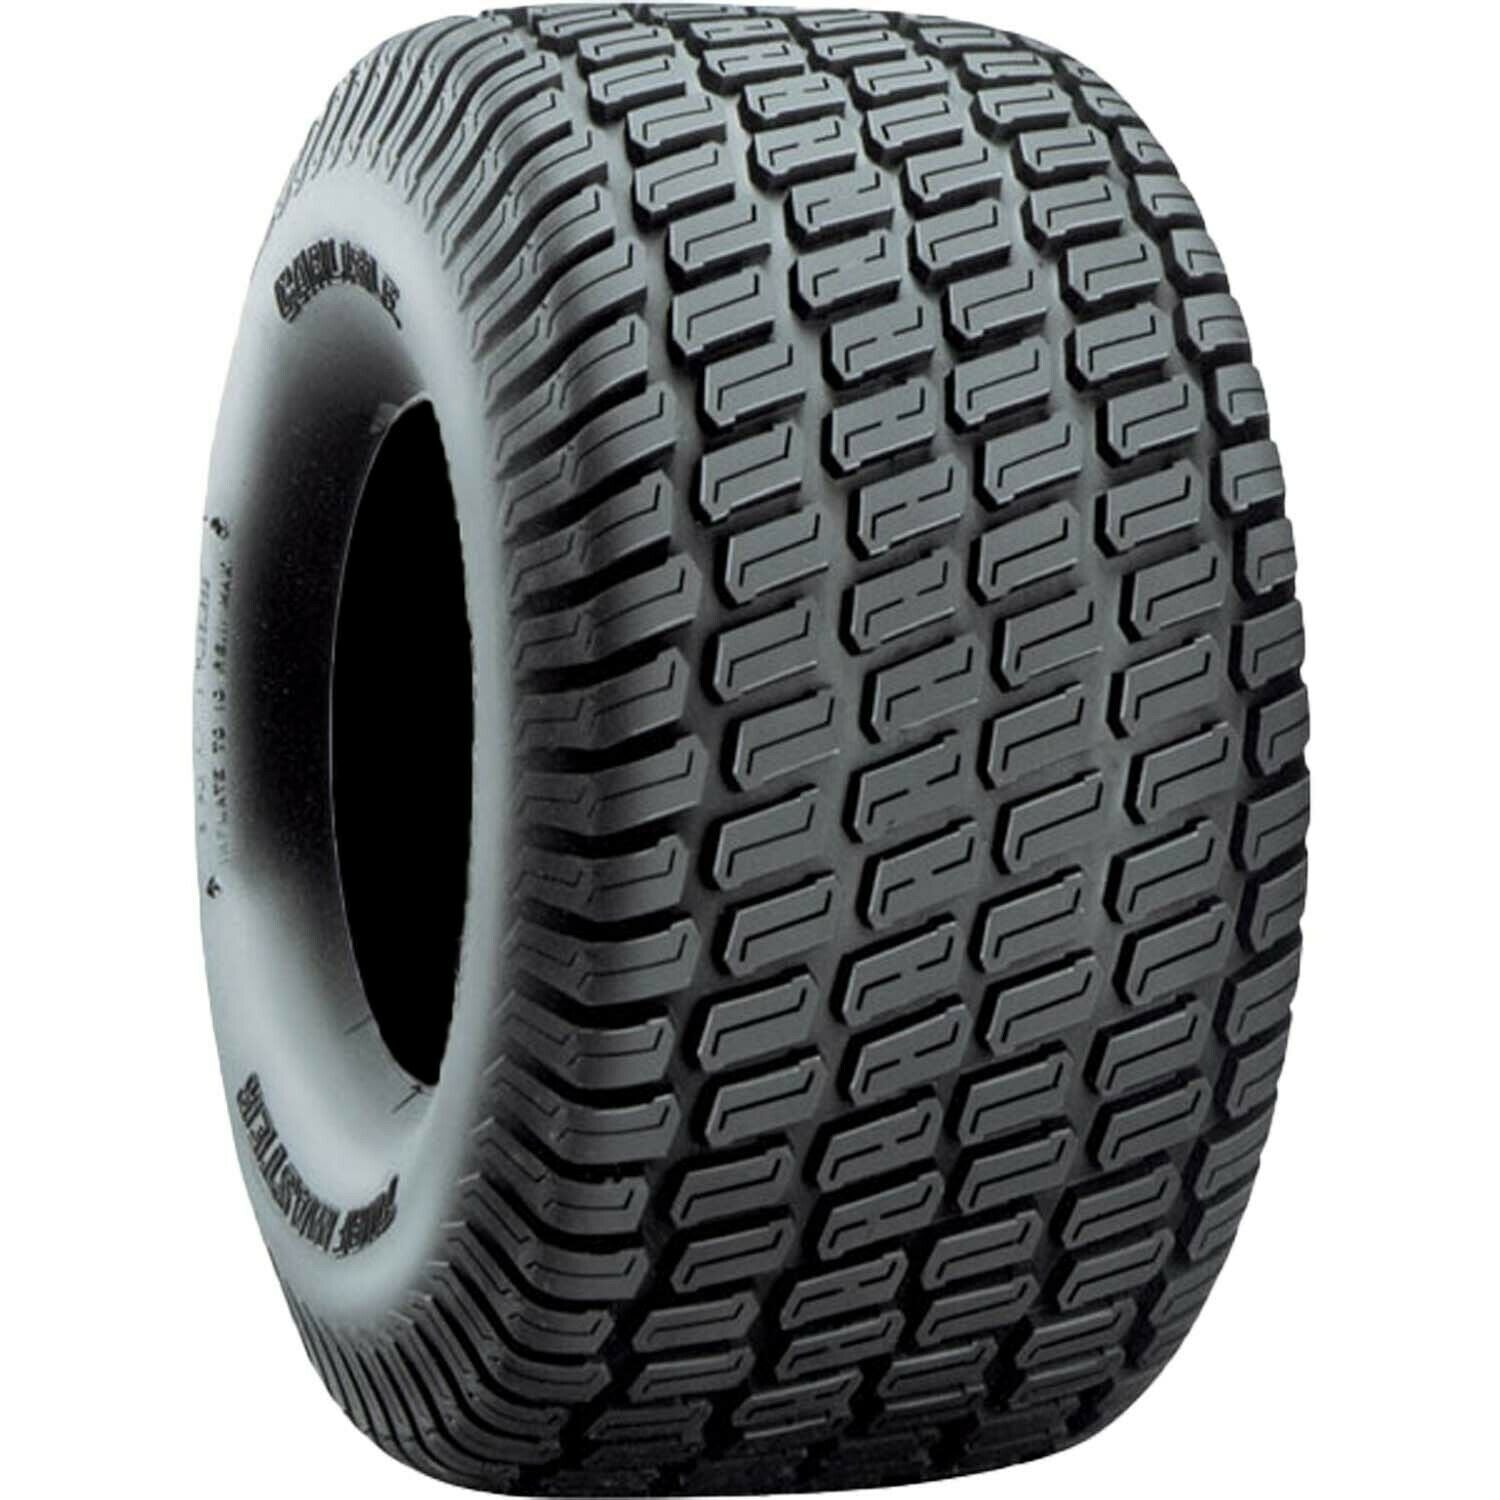 Carlisle Turf Master Lawn and Garden Tire 4Ply 22x10.50-12